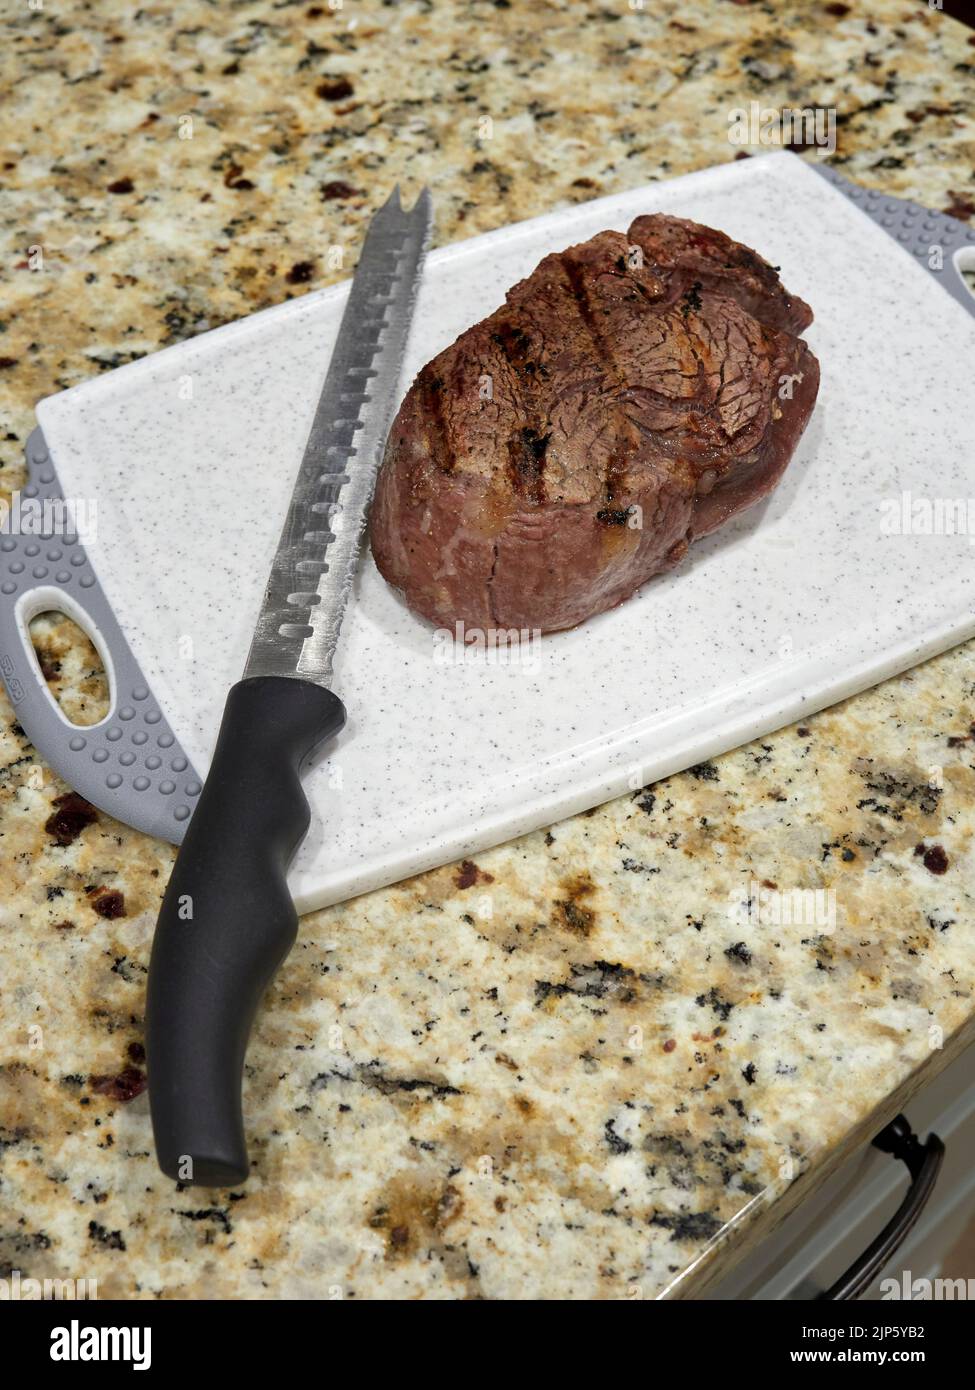 Grilled or cooked filet steak on a cutting board with a knife ready for a lunch or dinner meal. Stock Photo